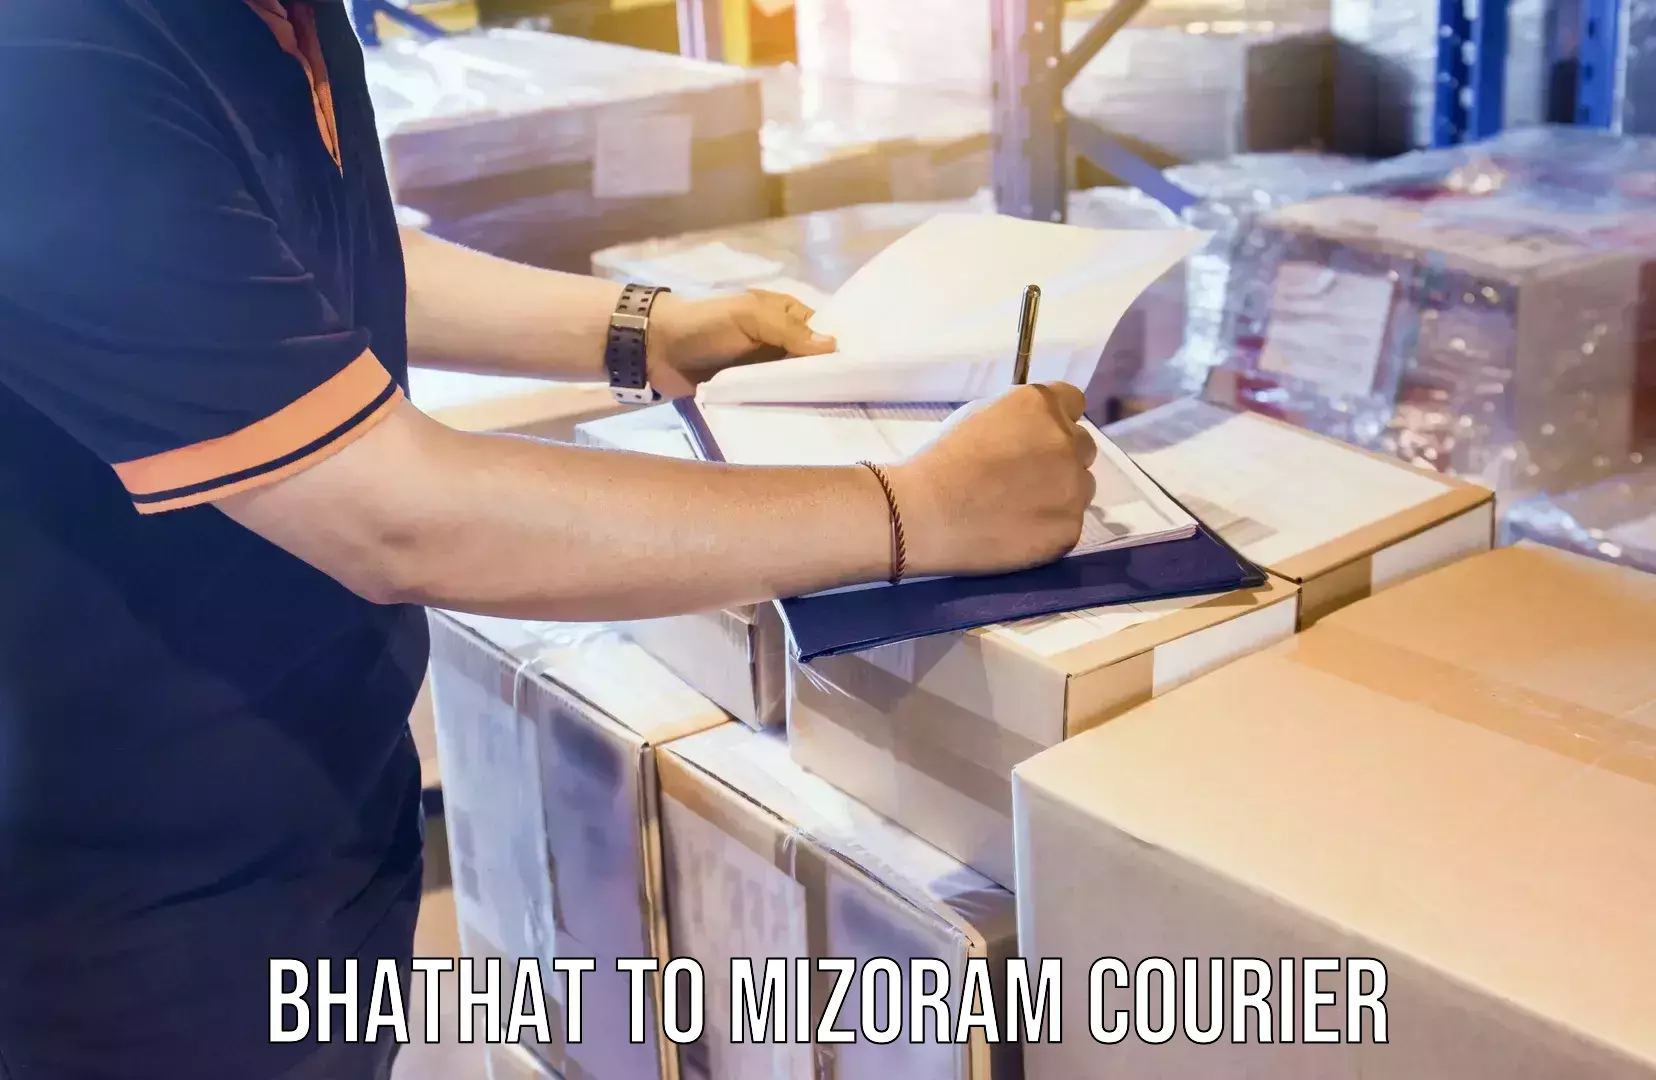 End-to-end delivery Bhathat to Mizoram